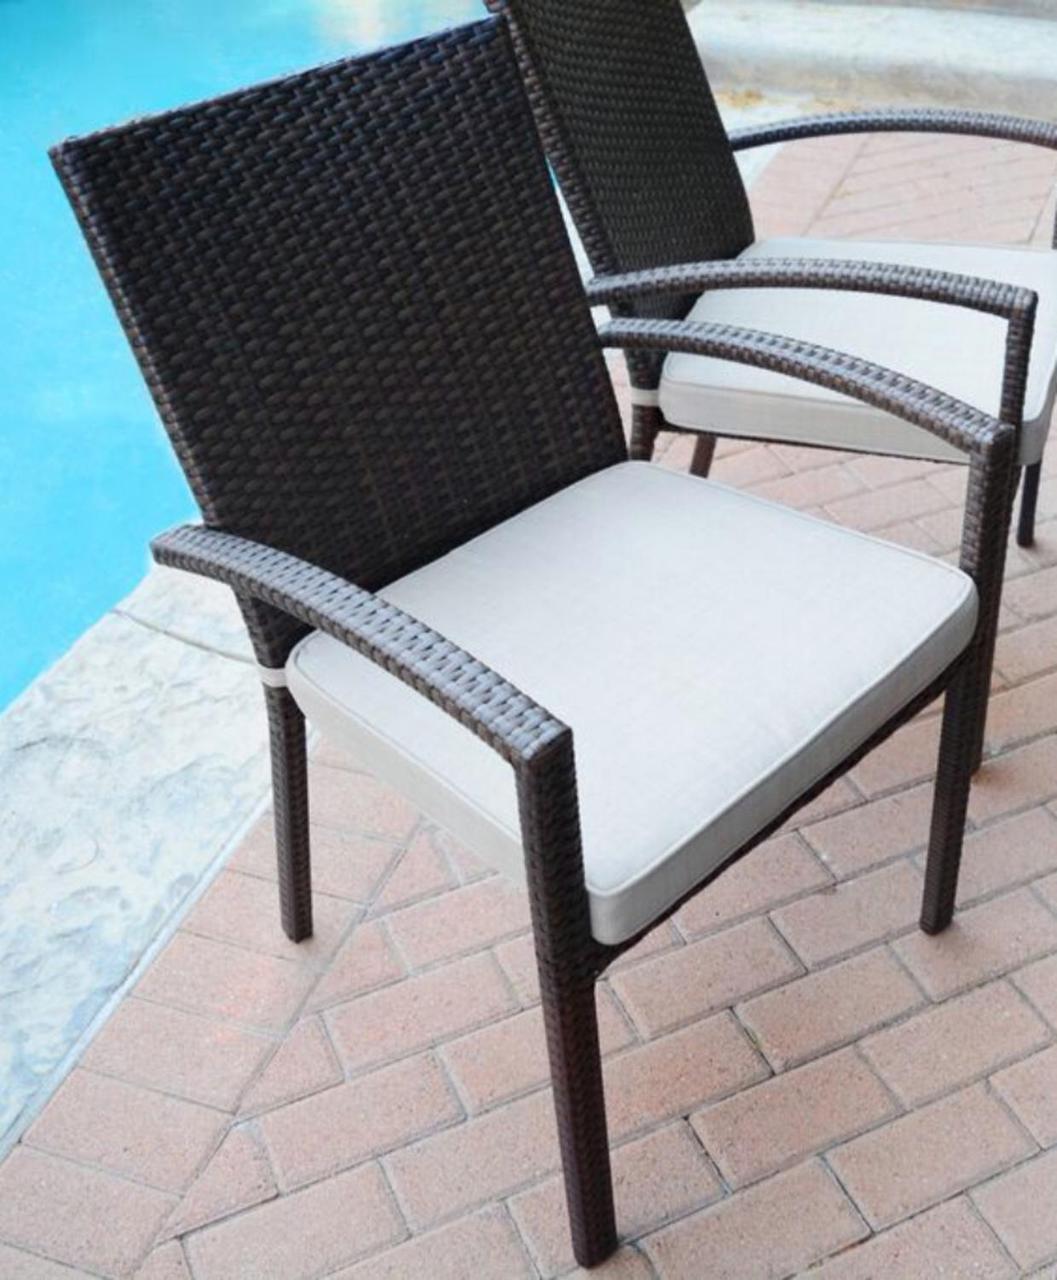 resin wicker patio chair by the pool